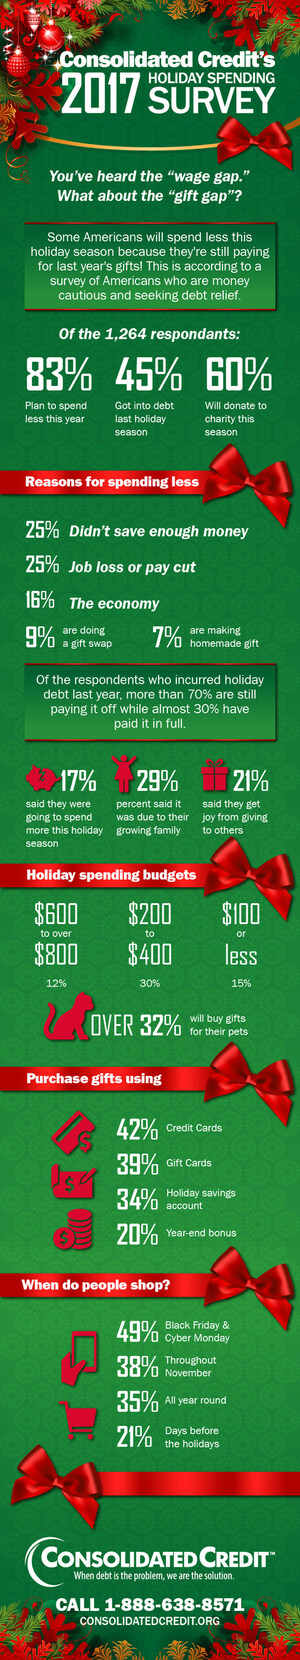 While Well-Off Americans Are Spending More This Holiday Season, Survey Shows Some Americans Are Spending Less